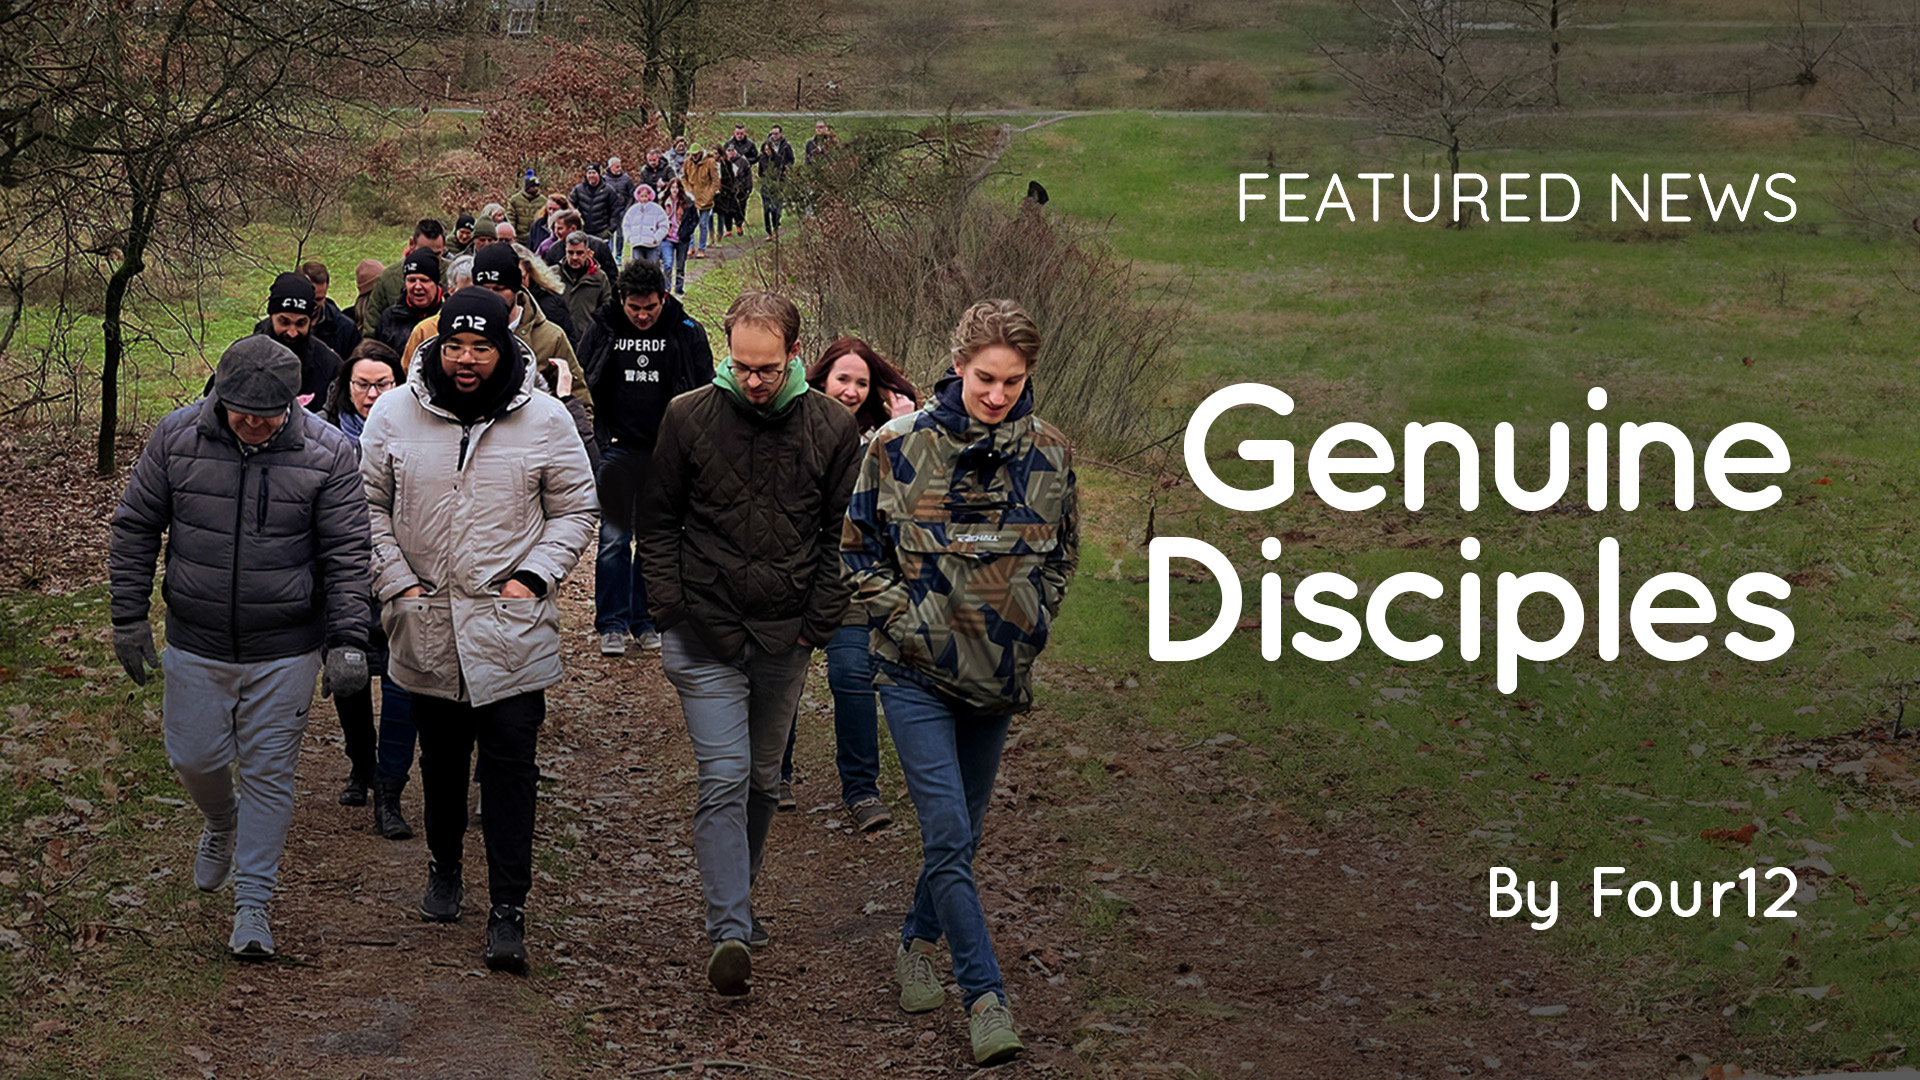 Image for “Genuine Disciples, Obedient Saints” about leadership and discipleship.